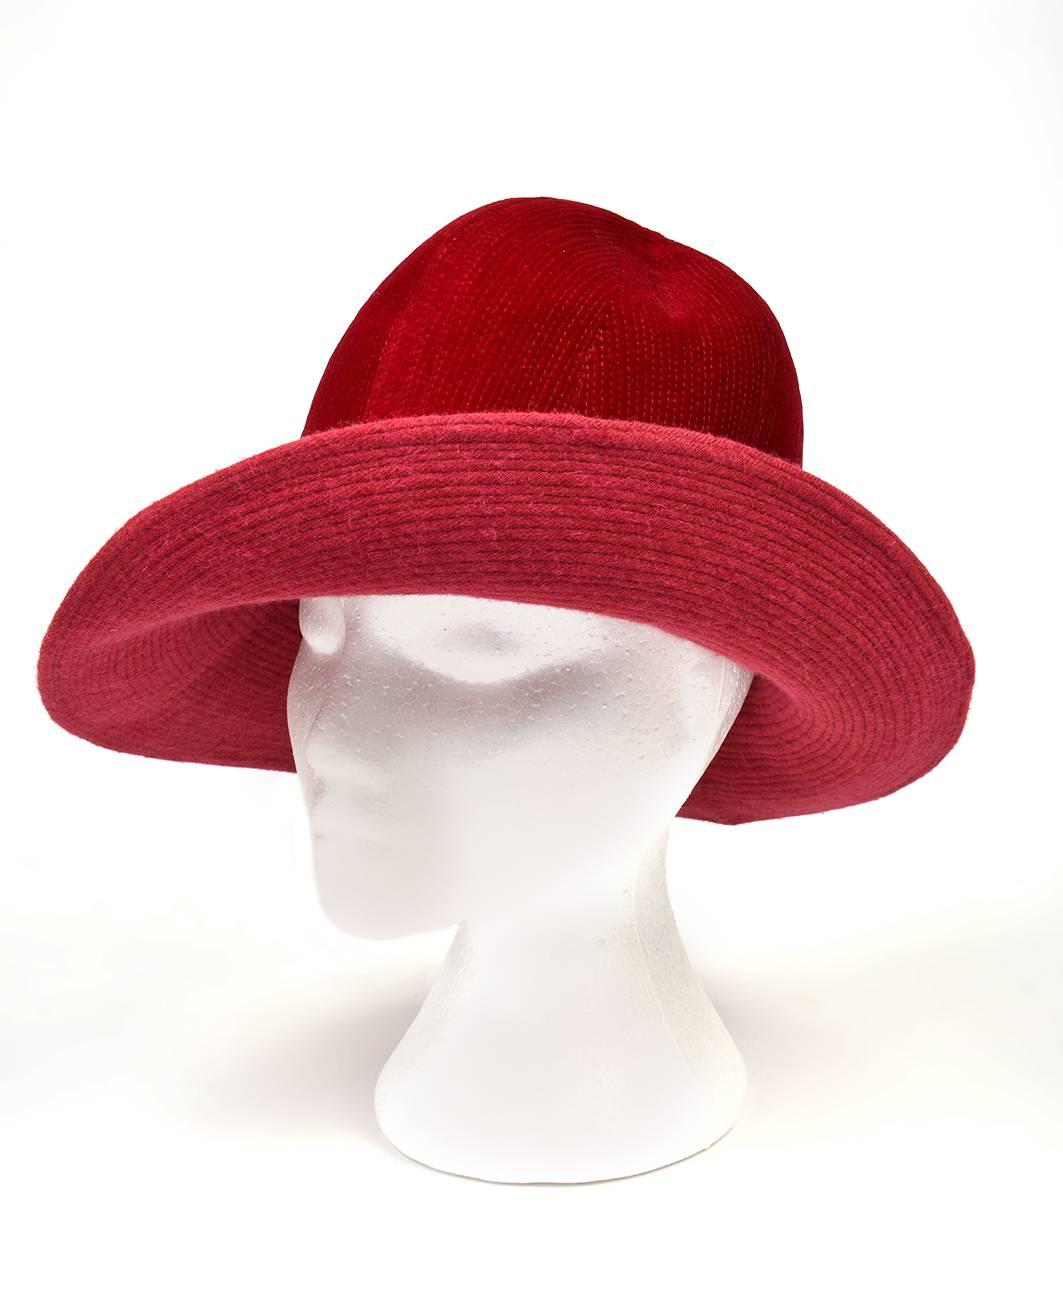 1970s Atelier Lucas Velvet Cranberry Red Hat

Gorgeous 1970s cranberry red hat by Atelier Lucas for Lord and Taylor. This sumptuous velvet hat is entirely decorated in thin stitched lines. The stitches curving along the brim, and create a